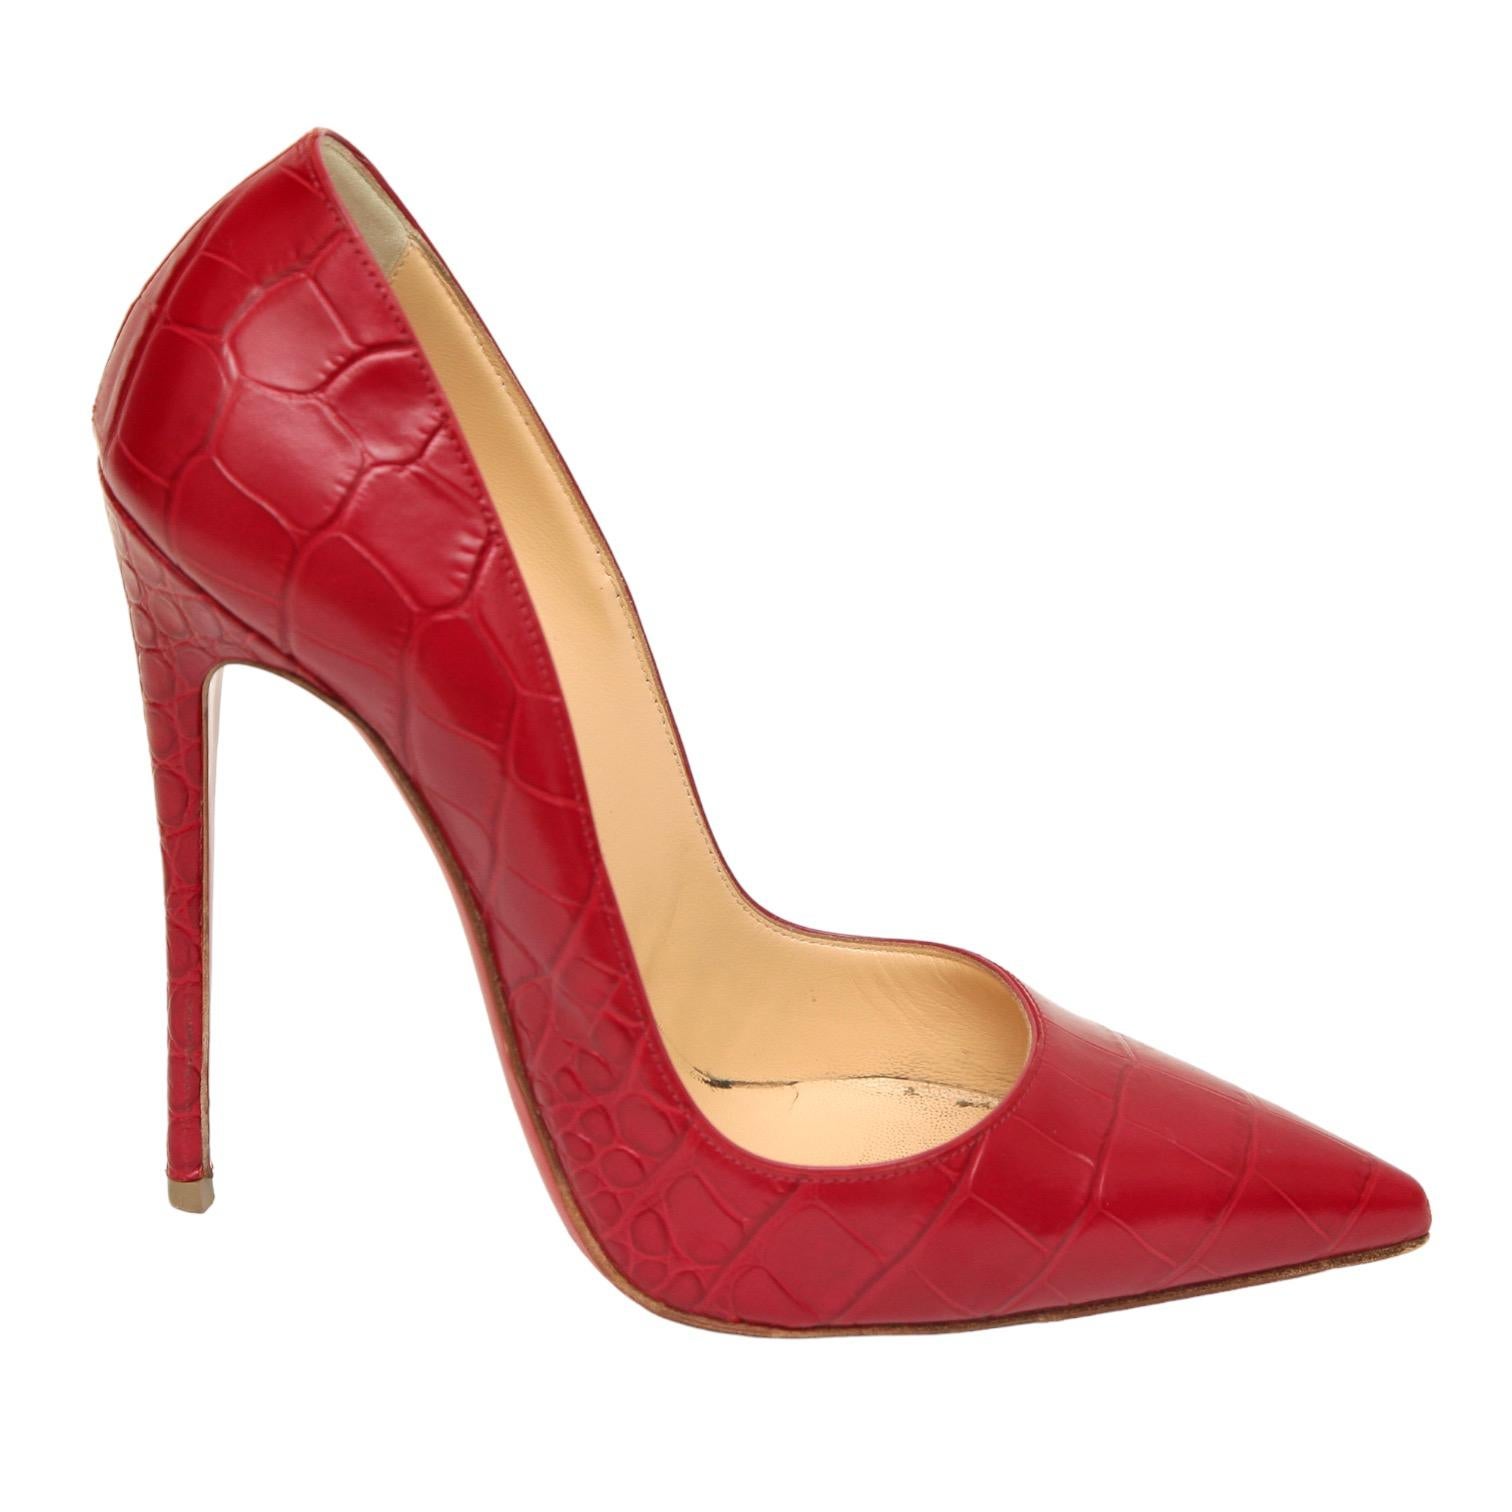 
GUARANTEED AUTHENTIC CHRISTIAN LOUBOUTIN SO KATE 120mm RED FAUX CROC PUMPS

Design:
- Red pink faux croc leather classic So Kate 120mm pointed toe pumps.
- Self-covered heel.
- Leather lining.
- Signature red leather sole.
- Comes with Christian